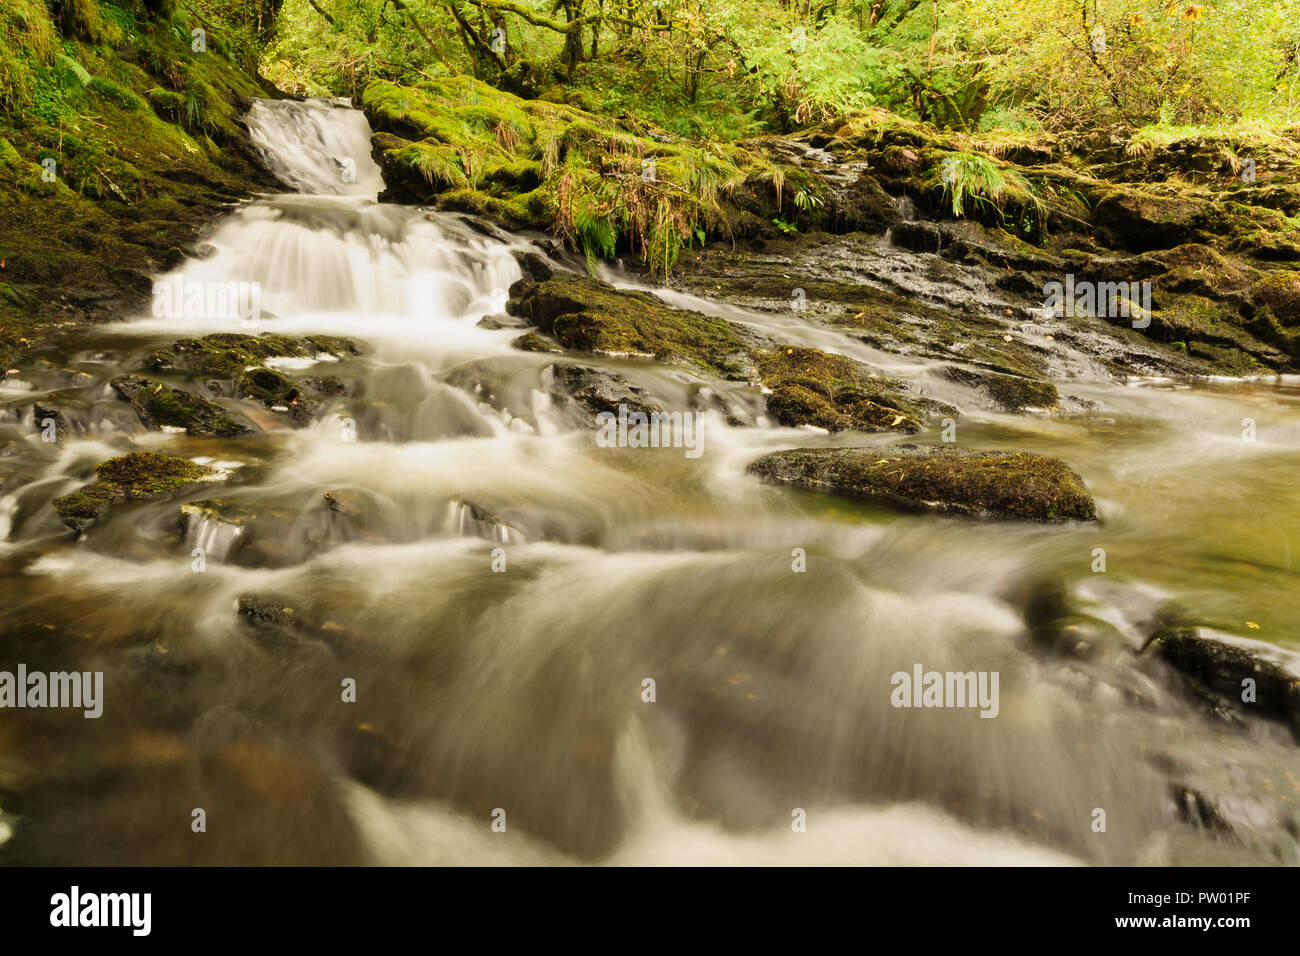 The river Ceunant Ty'n y Ddol in the Lledr Valley near Roman Bridge in the heart of the Snowdonia National Park in North Wales Stock Photo